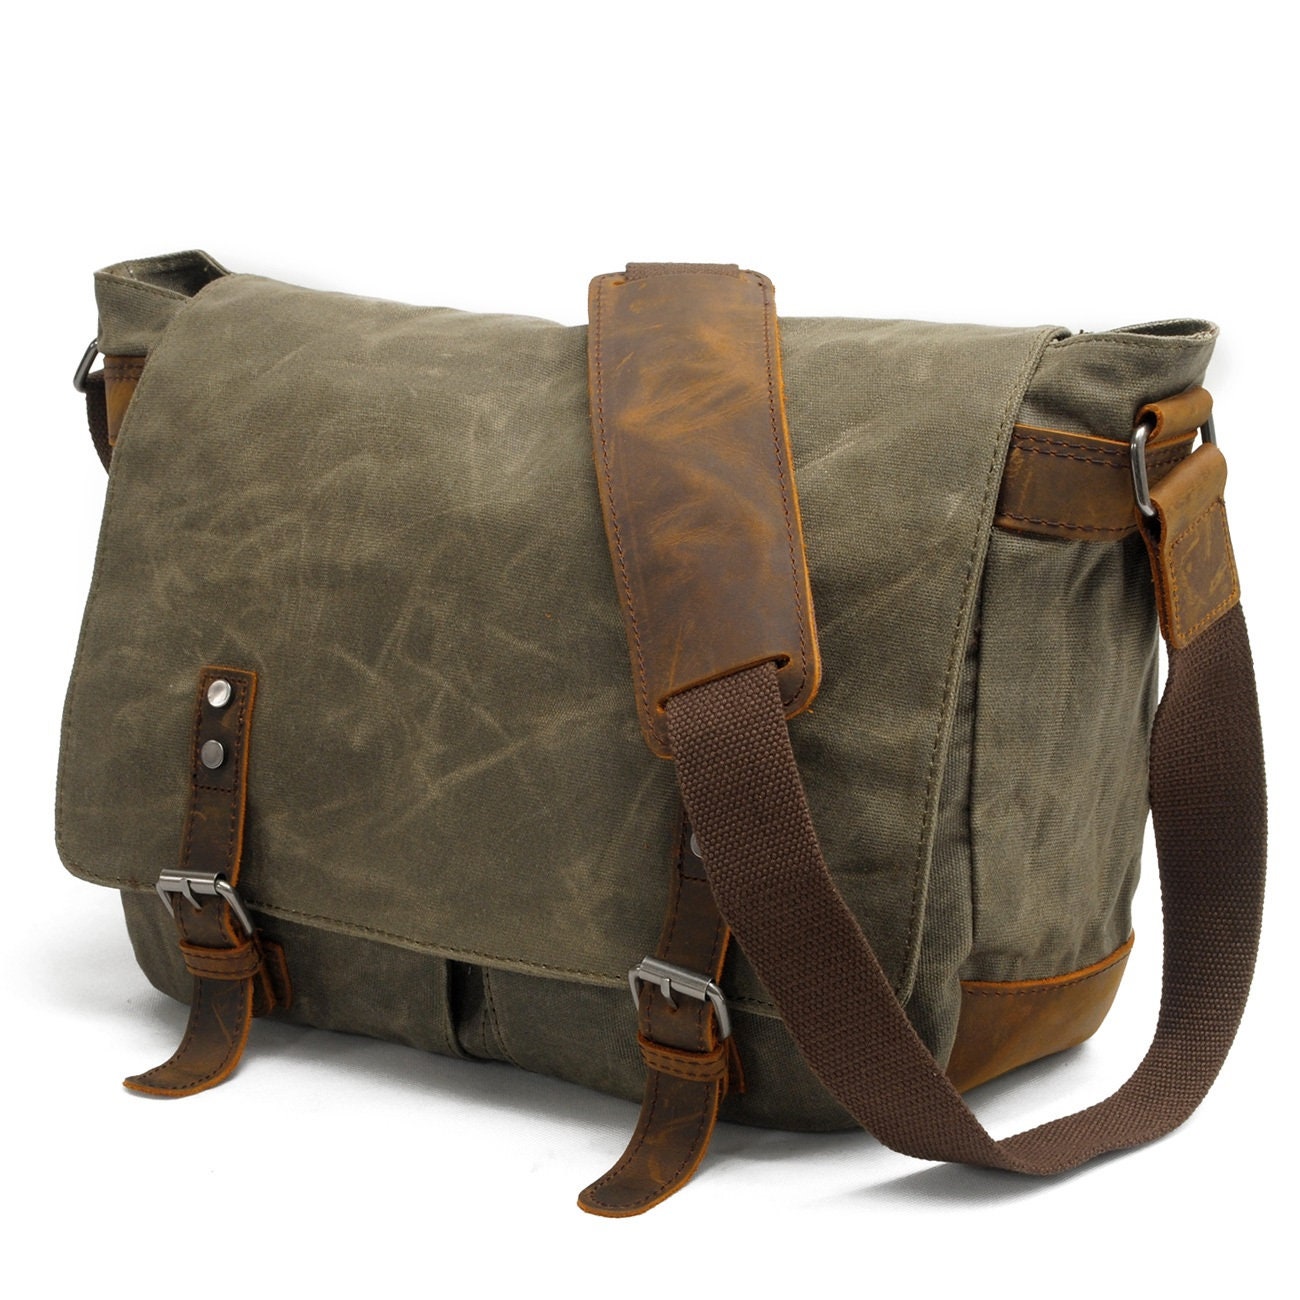 Buy Canvas Messenger Bag Online In India -  India